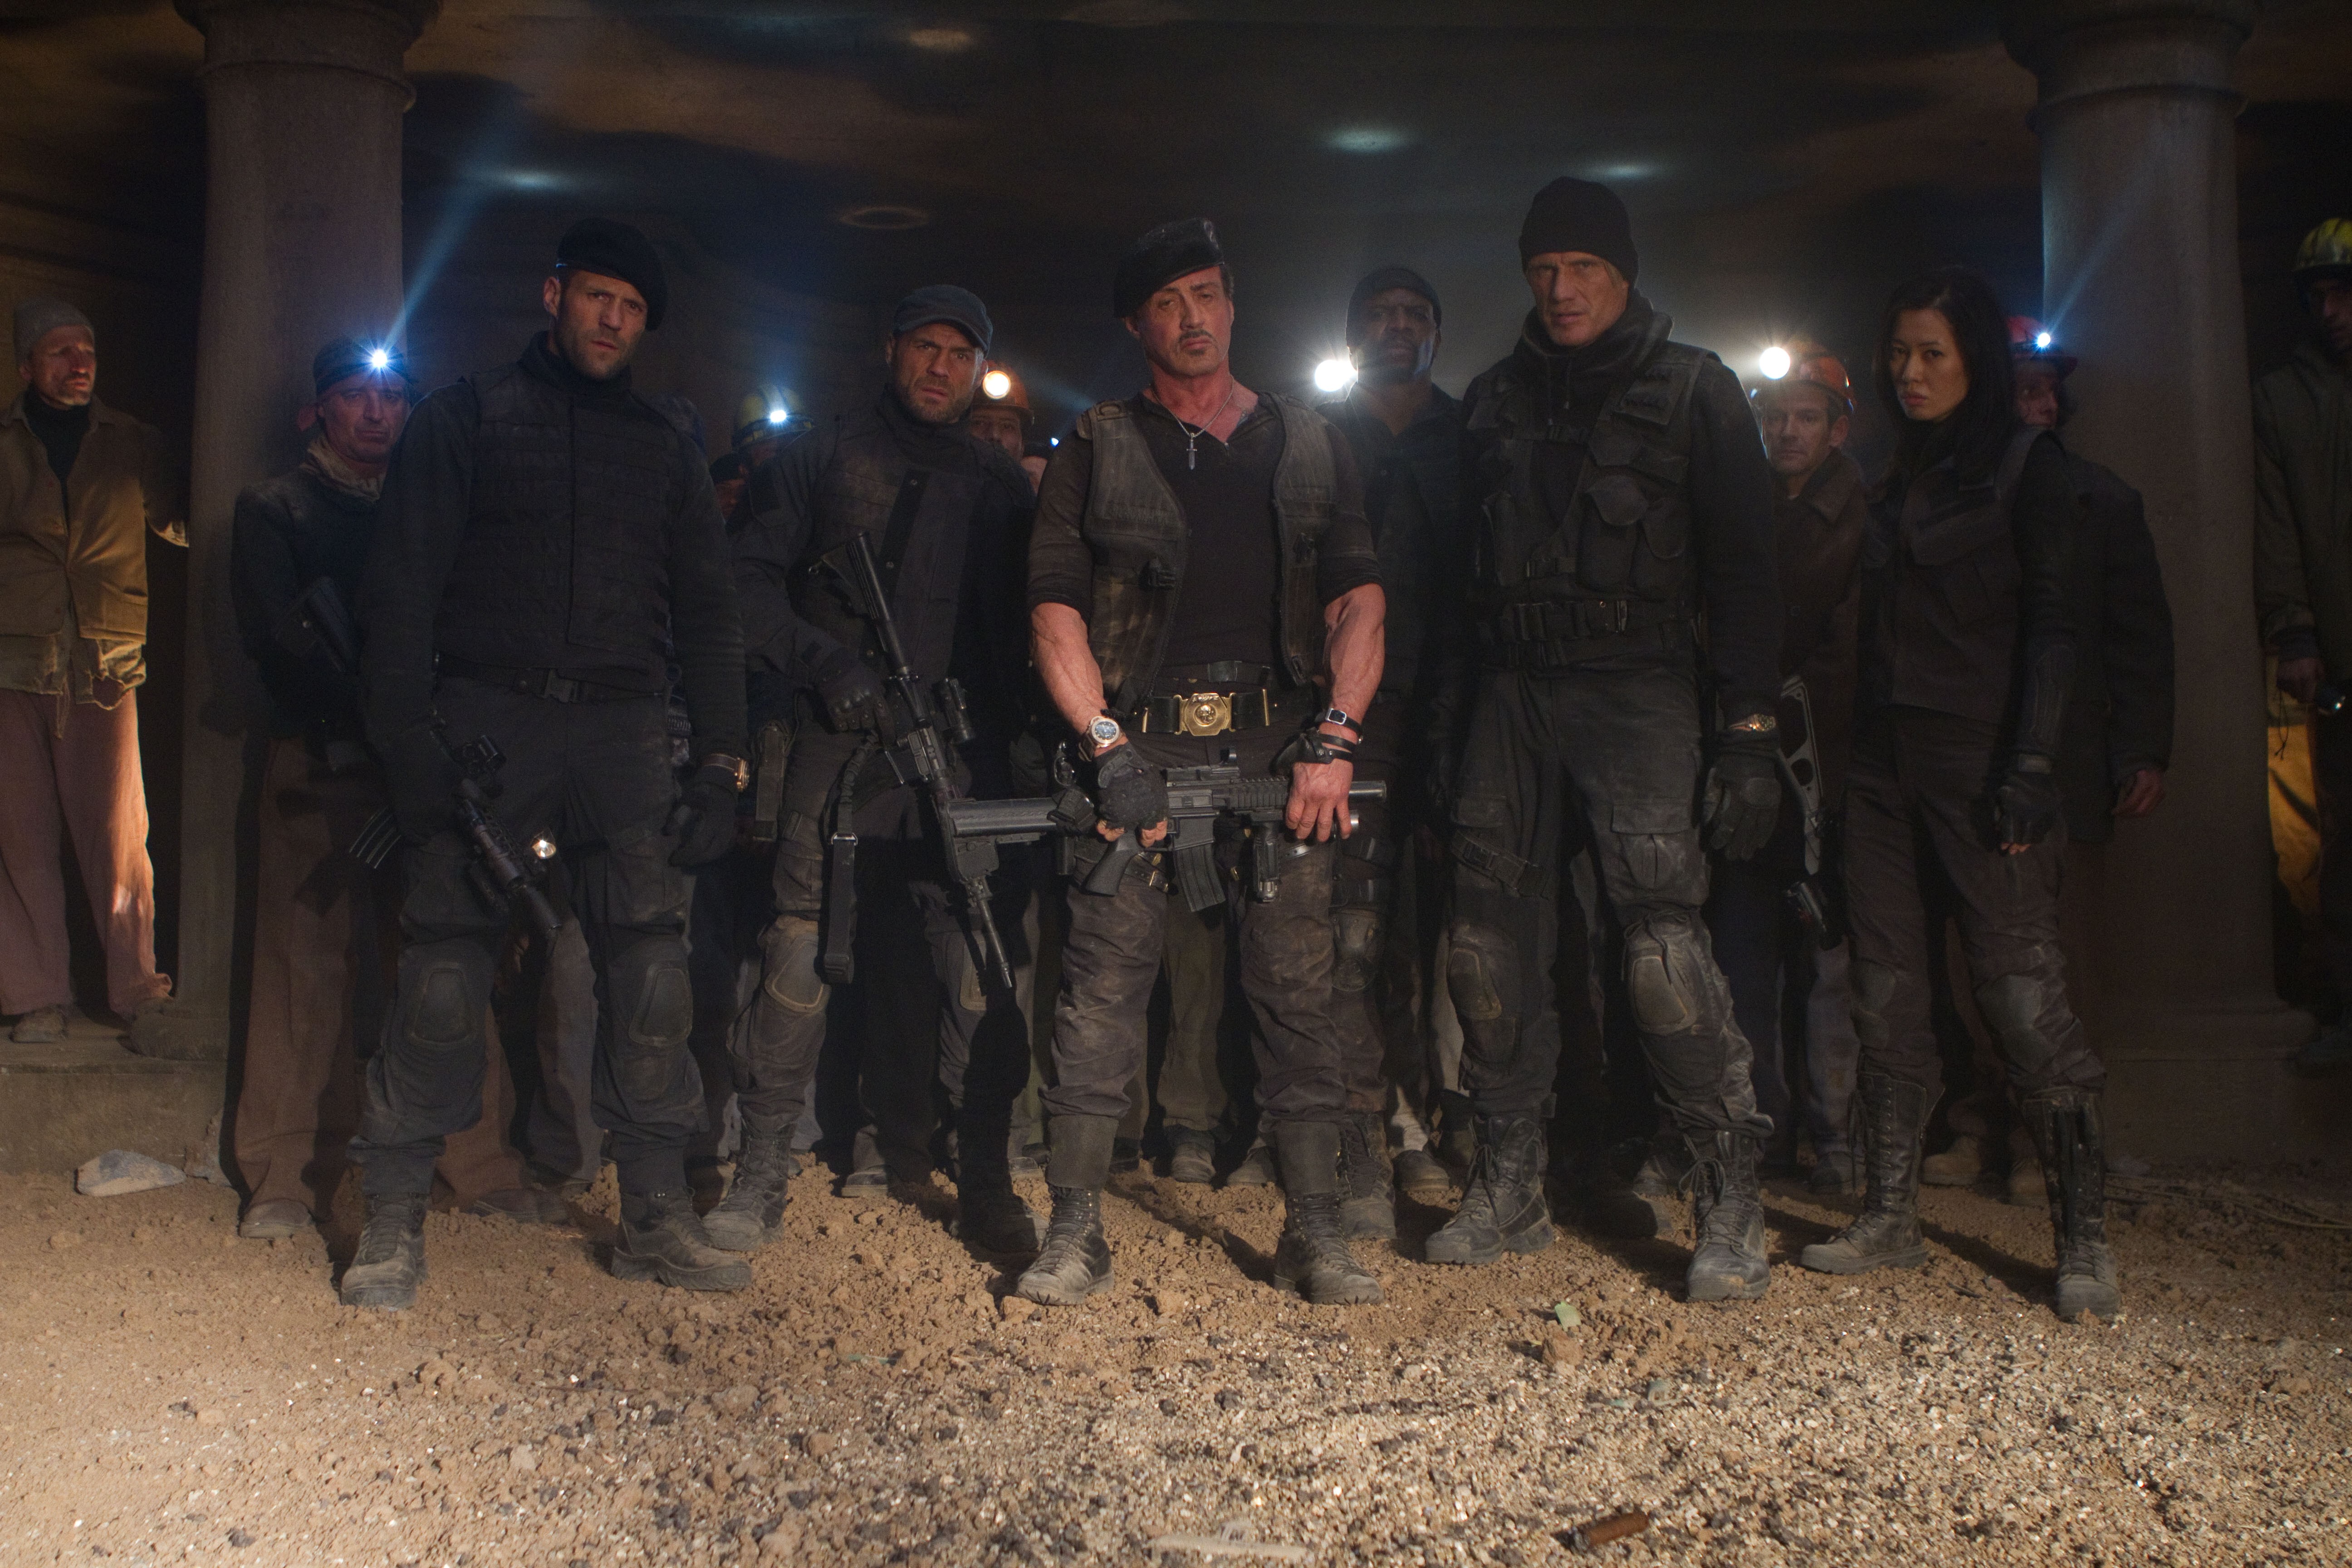 movie, the expendables 2, barney ross, dolph lundgren, gunnar jensen, hale caesar, jason statham, lee christmas, maggie (the expendables), nan yu, randy couture, sylvester stallone, terry crews, toll road, the expendables UHD